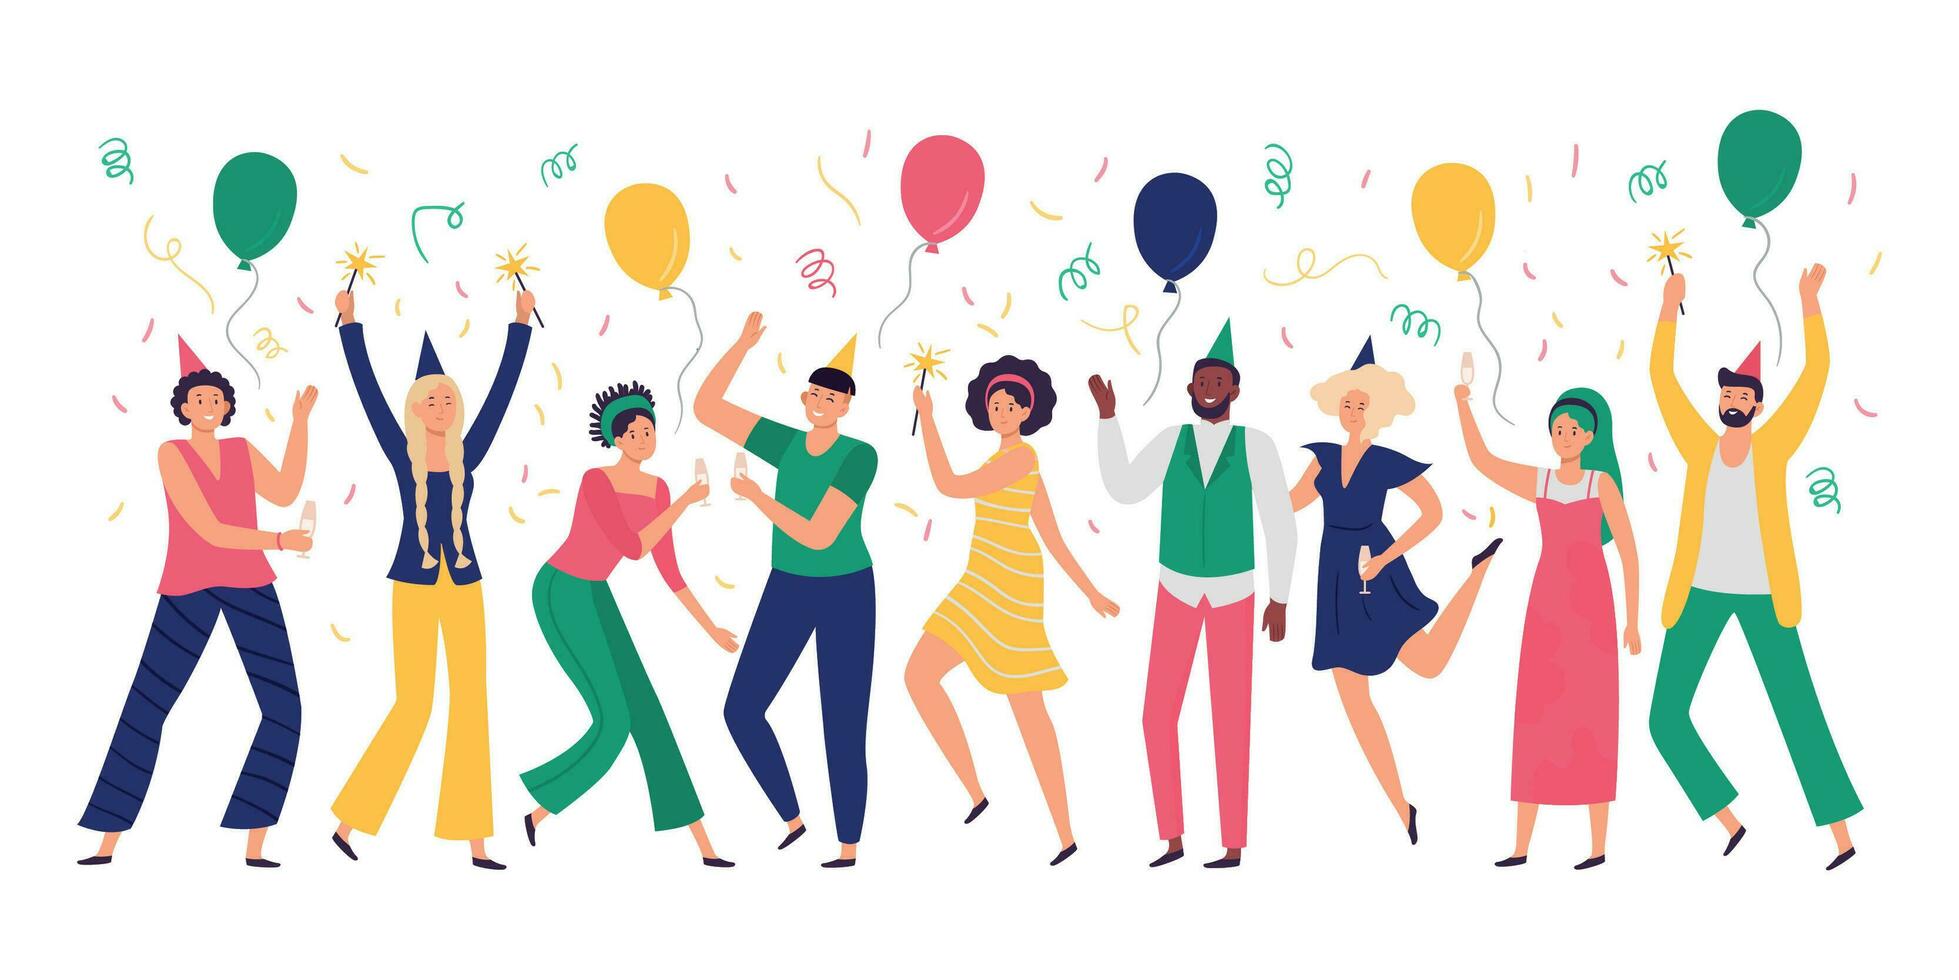 People celebrating. Young men and women dance at celebration party, joyful balloons and confetti vector illustration